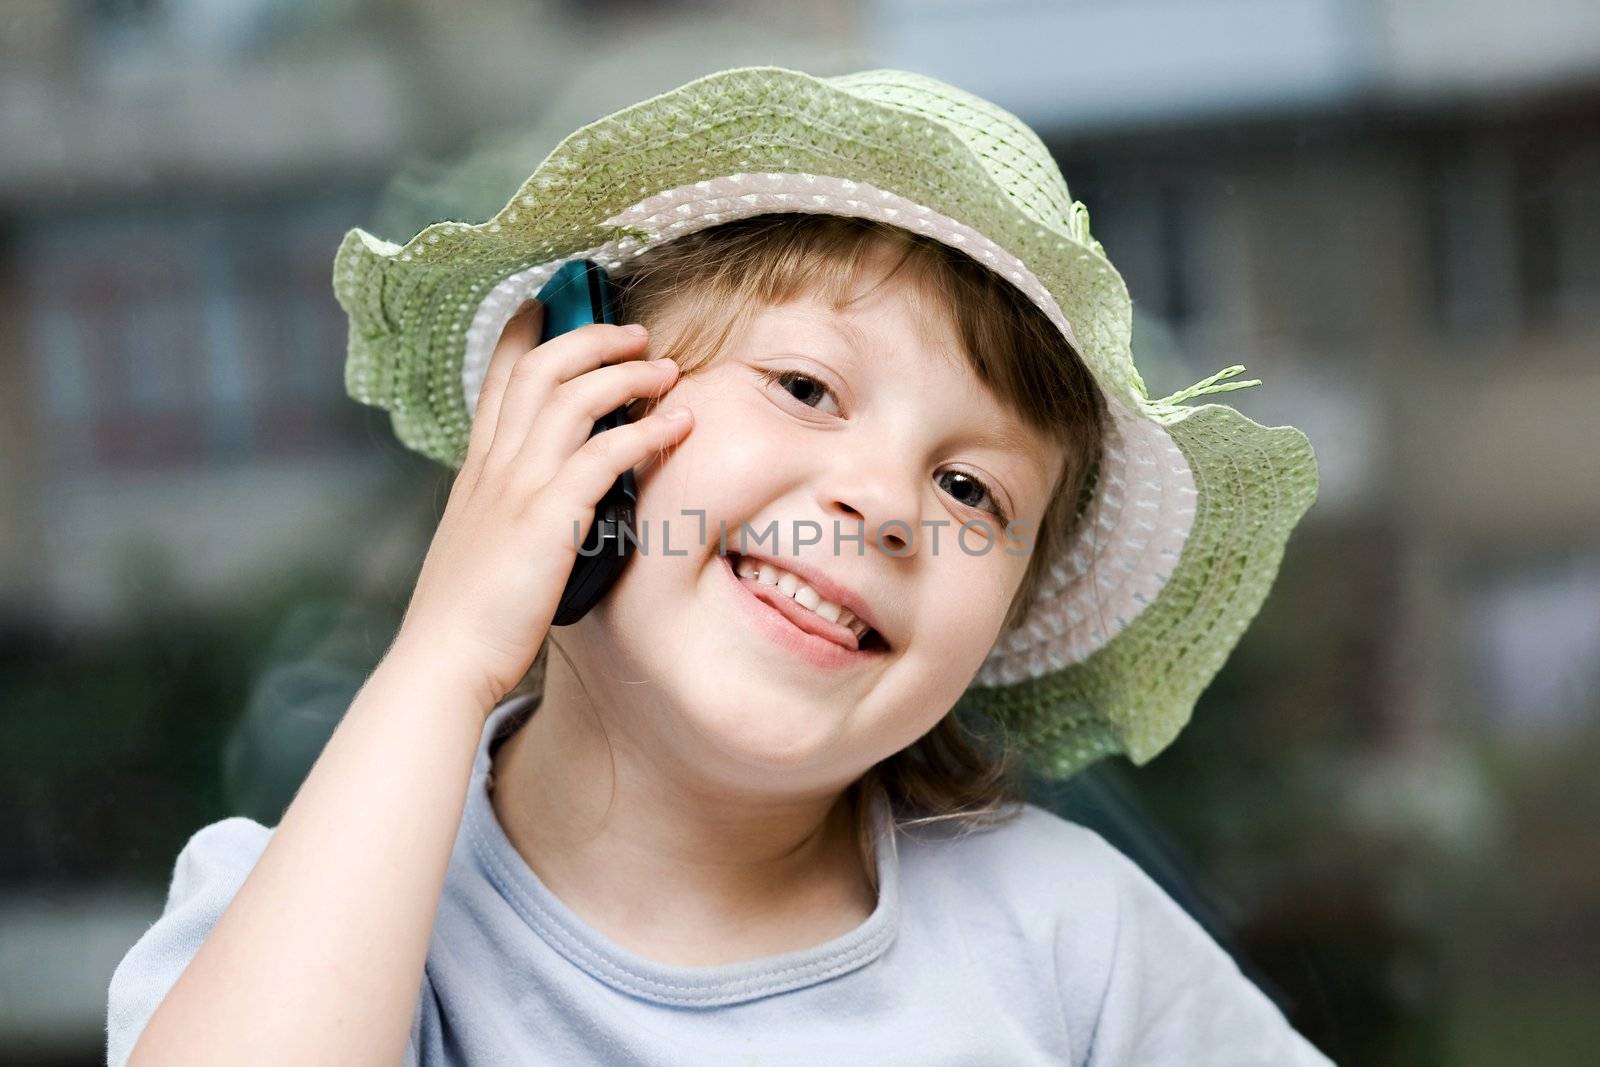 An image of young girl speaking on the phone